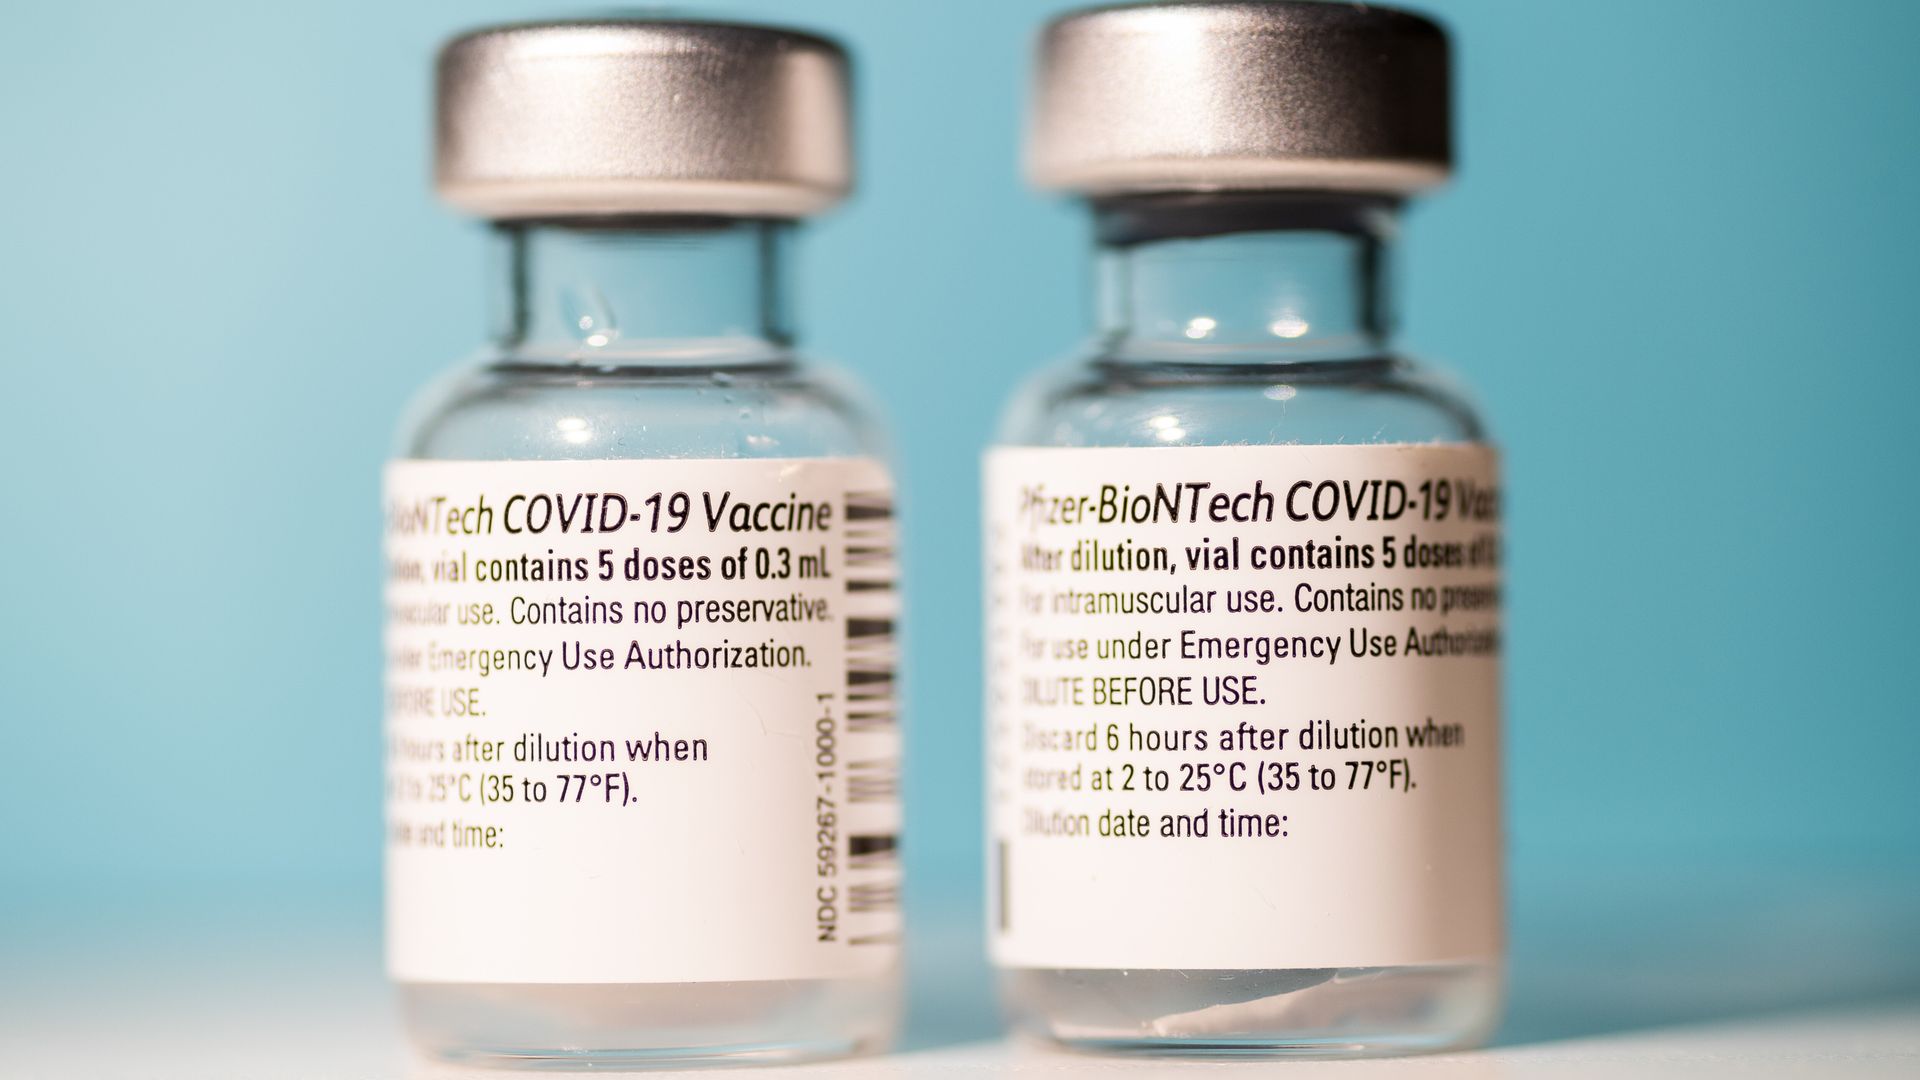 A vial of the Pfizer-BionTech COVID-19 vaccine